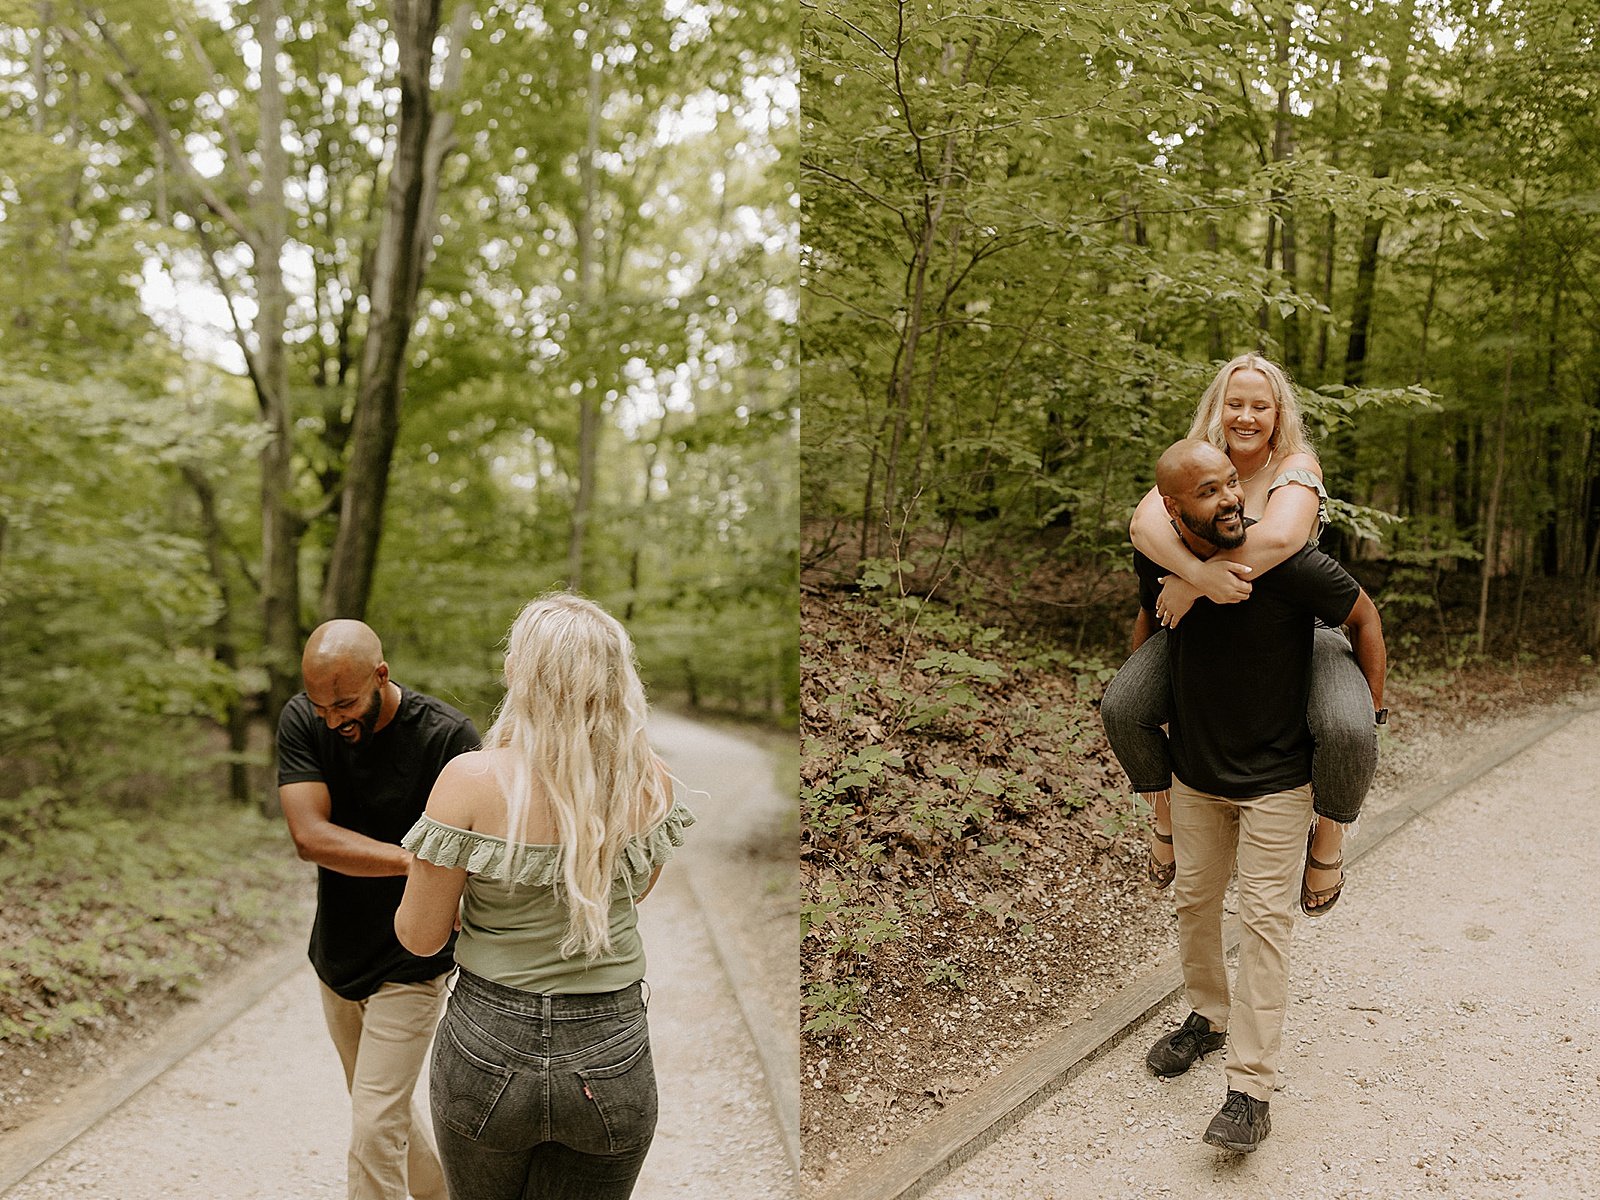  man and woman laughing together in the woods by Michigan wedding photographer  